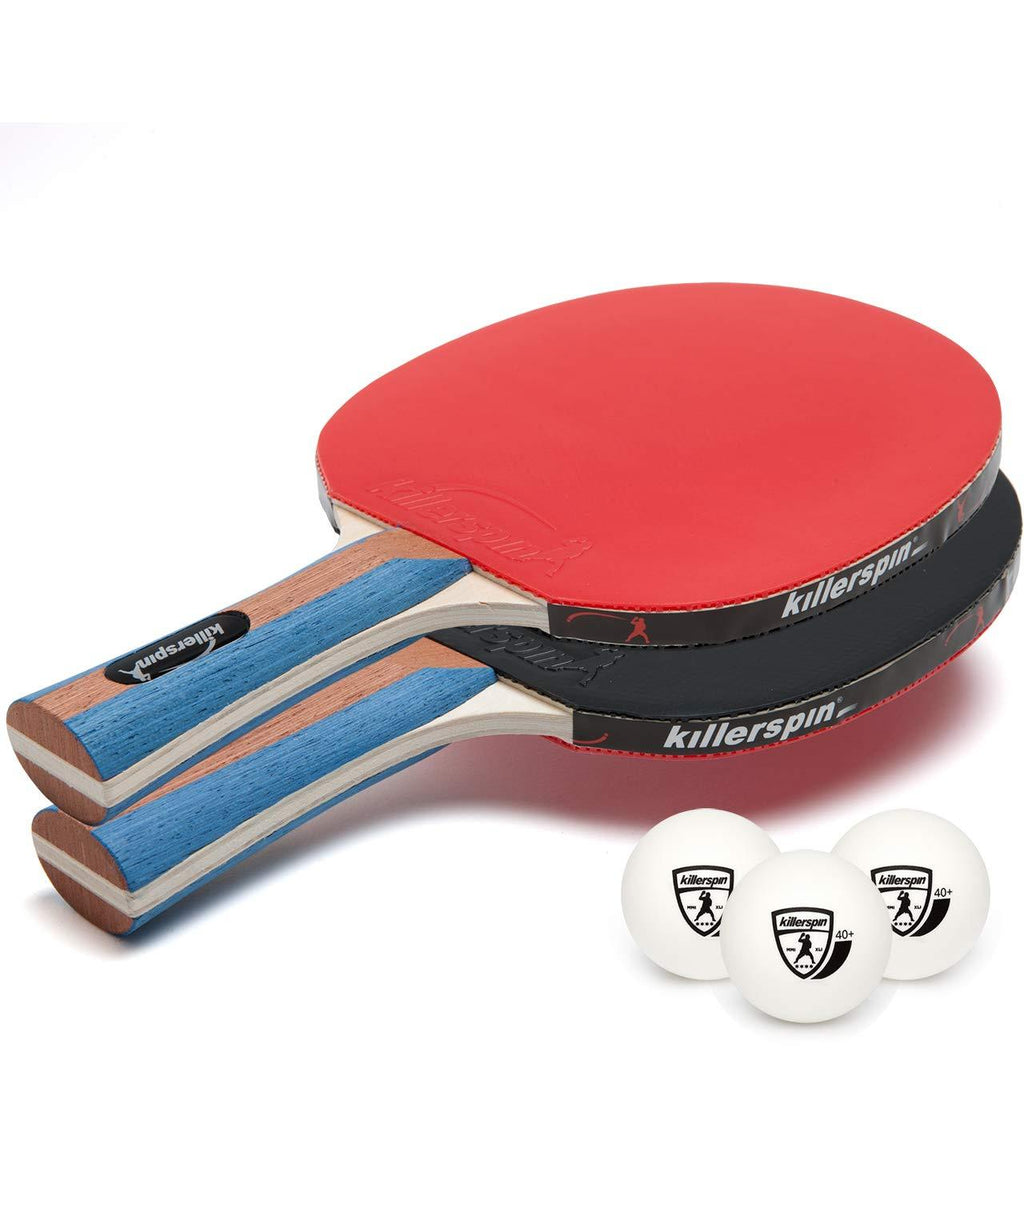 [AUSTRALIA] - Killerspin JET Set 2 Table Tennis Paddles and Ping Pong Balls, 2 Ping Pong Paddles and 3 Ping Pong Balls, Great for Beginners and Kids, Table Tennis Racket with Wood Blade, Jet Basic Rubber Grips Ping Pong Balls – Red & Black 